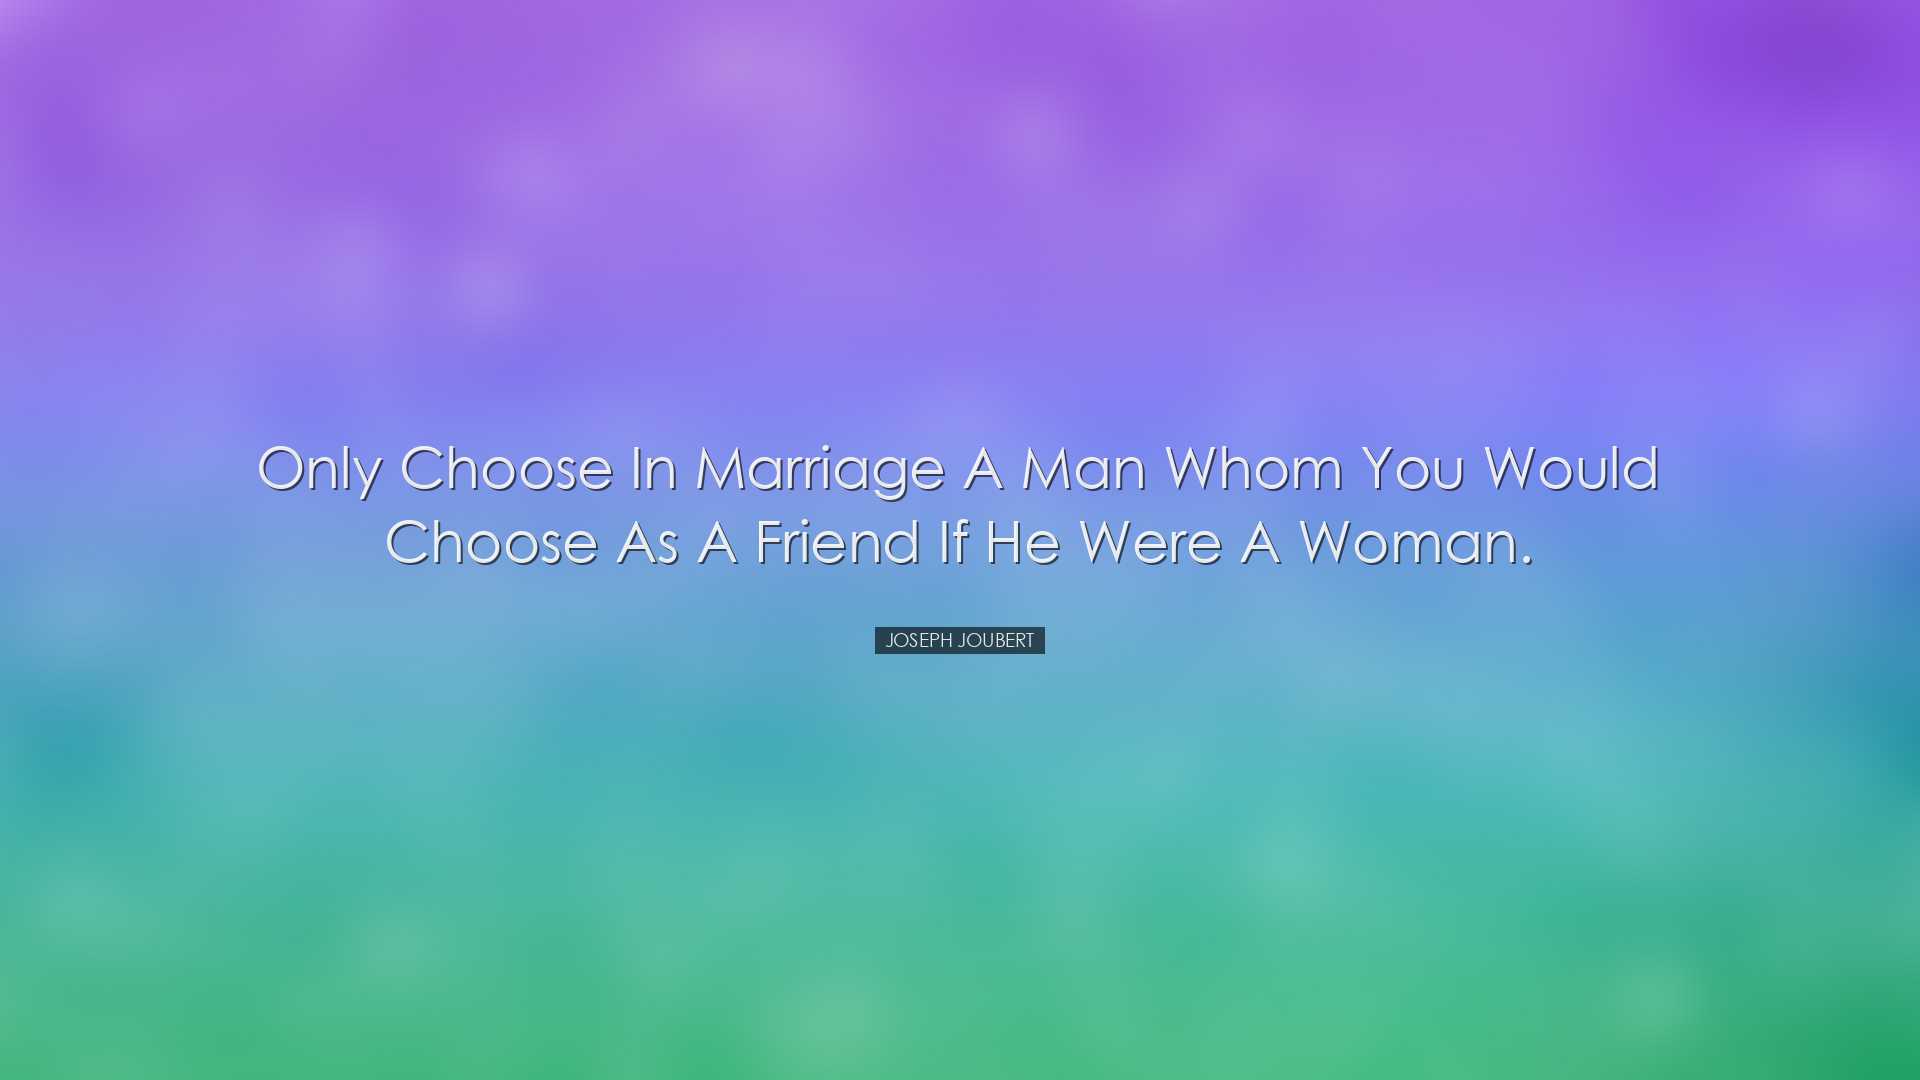 Only choose in marriage a man whom you would choose as a friend if